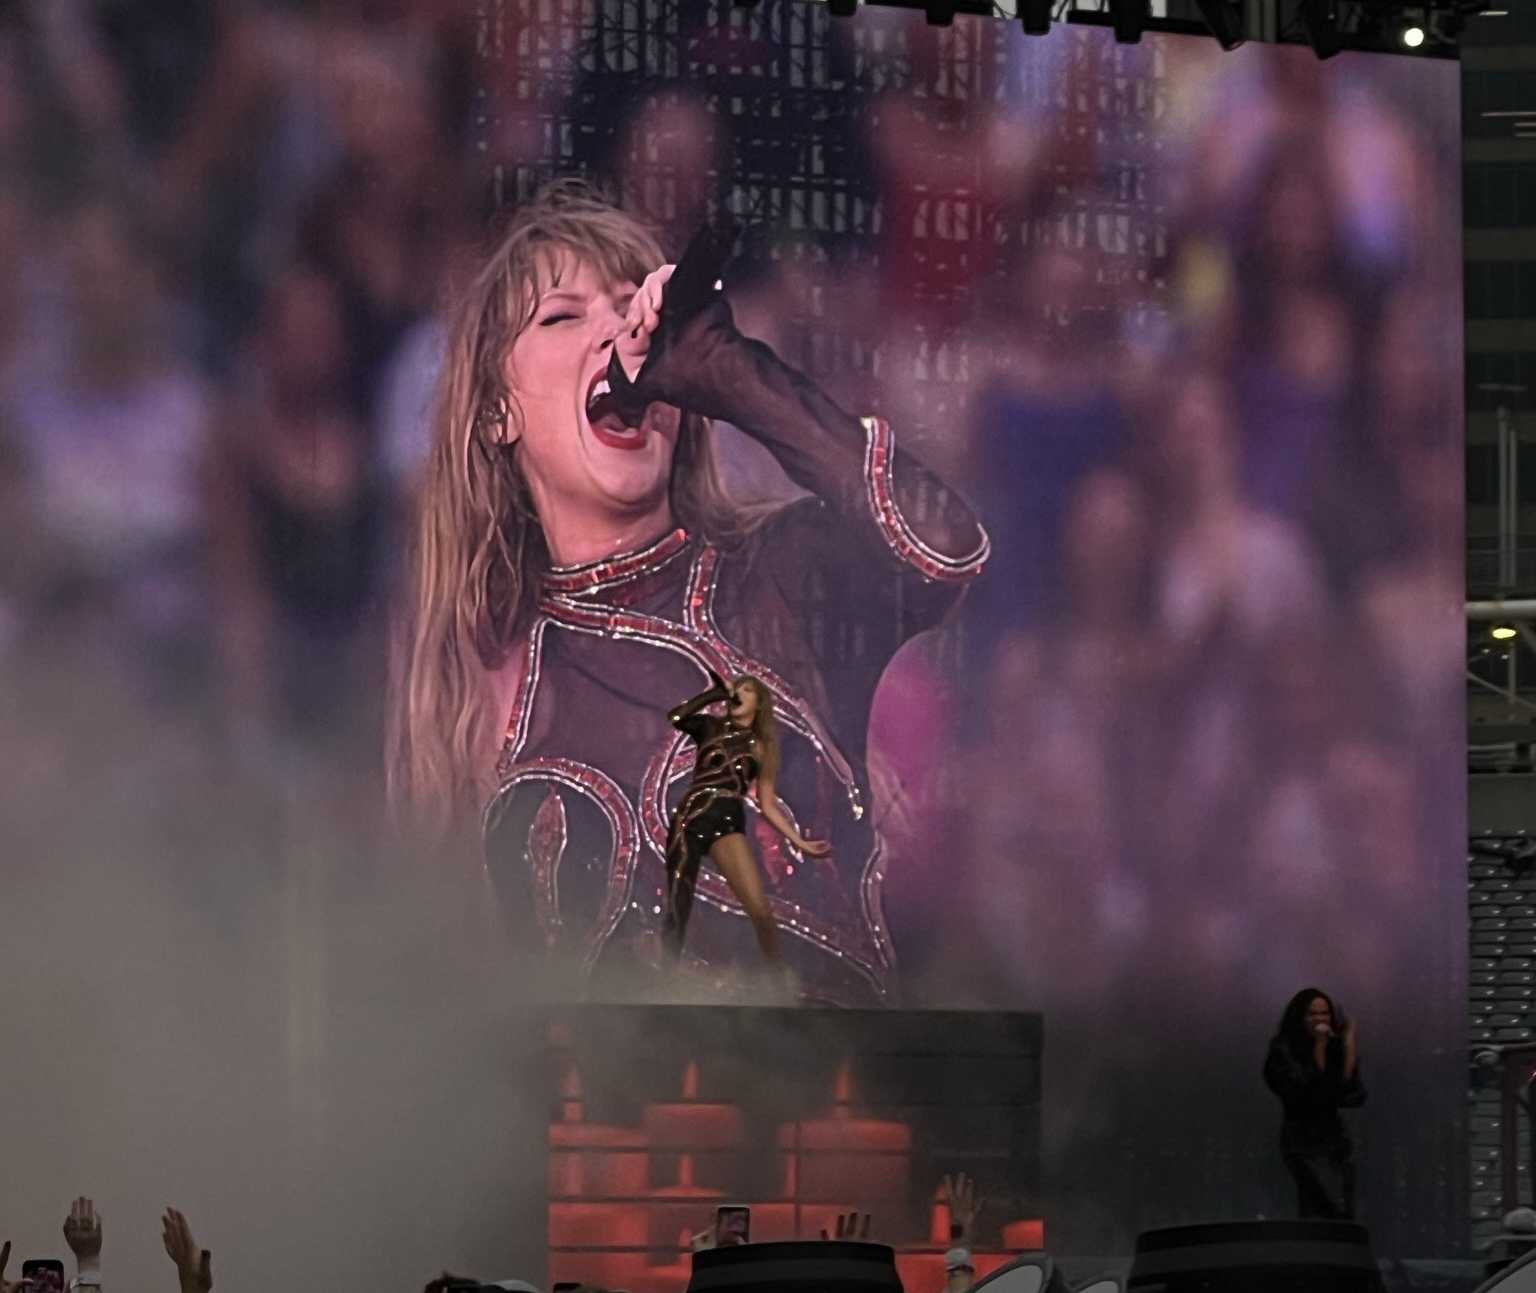 Taylor Swift on stage singing.